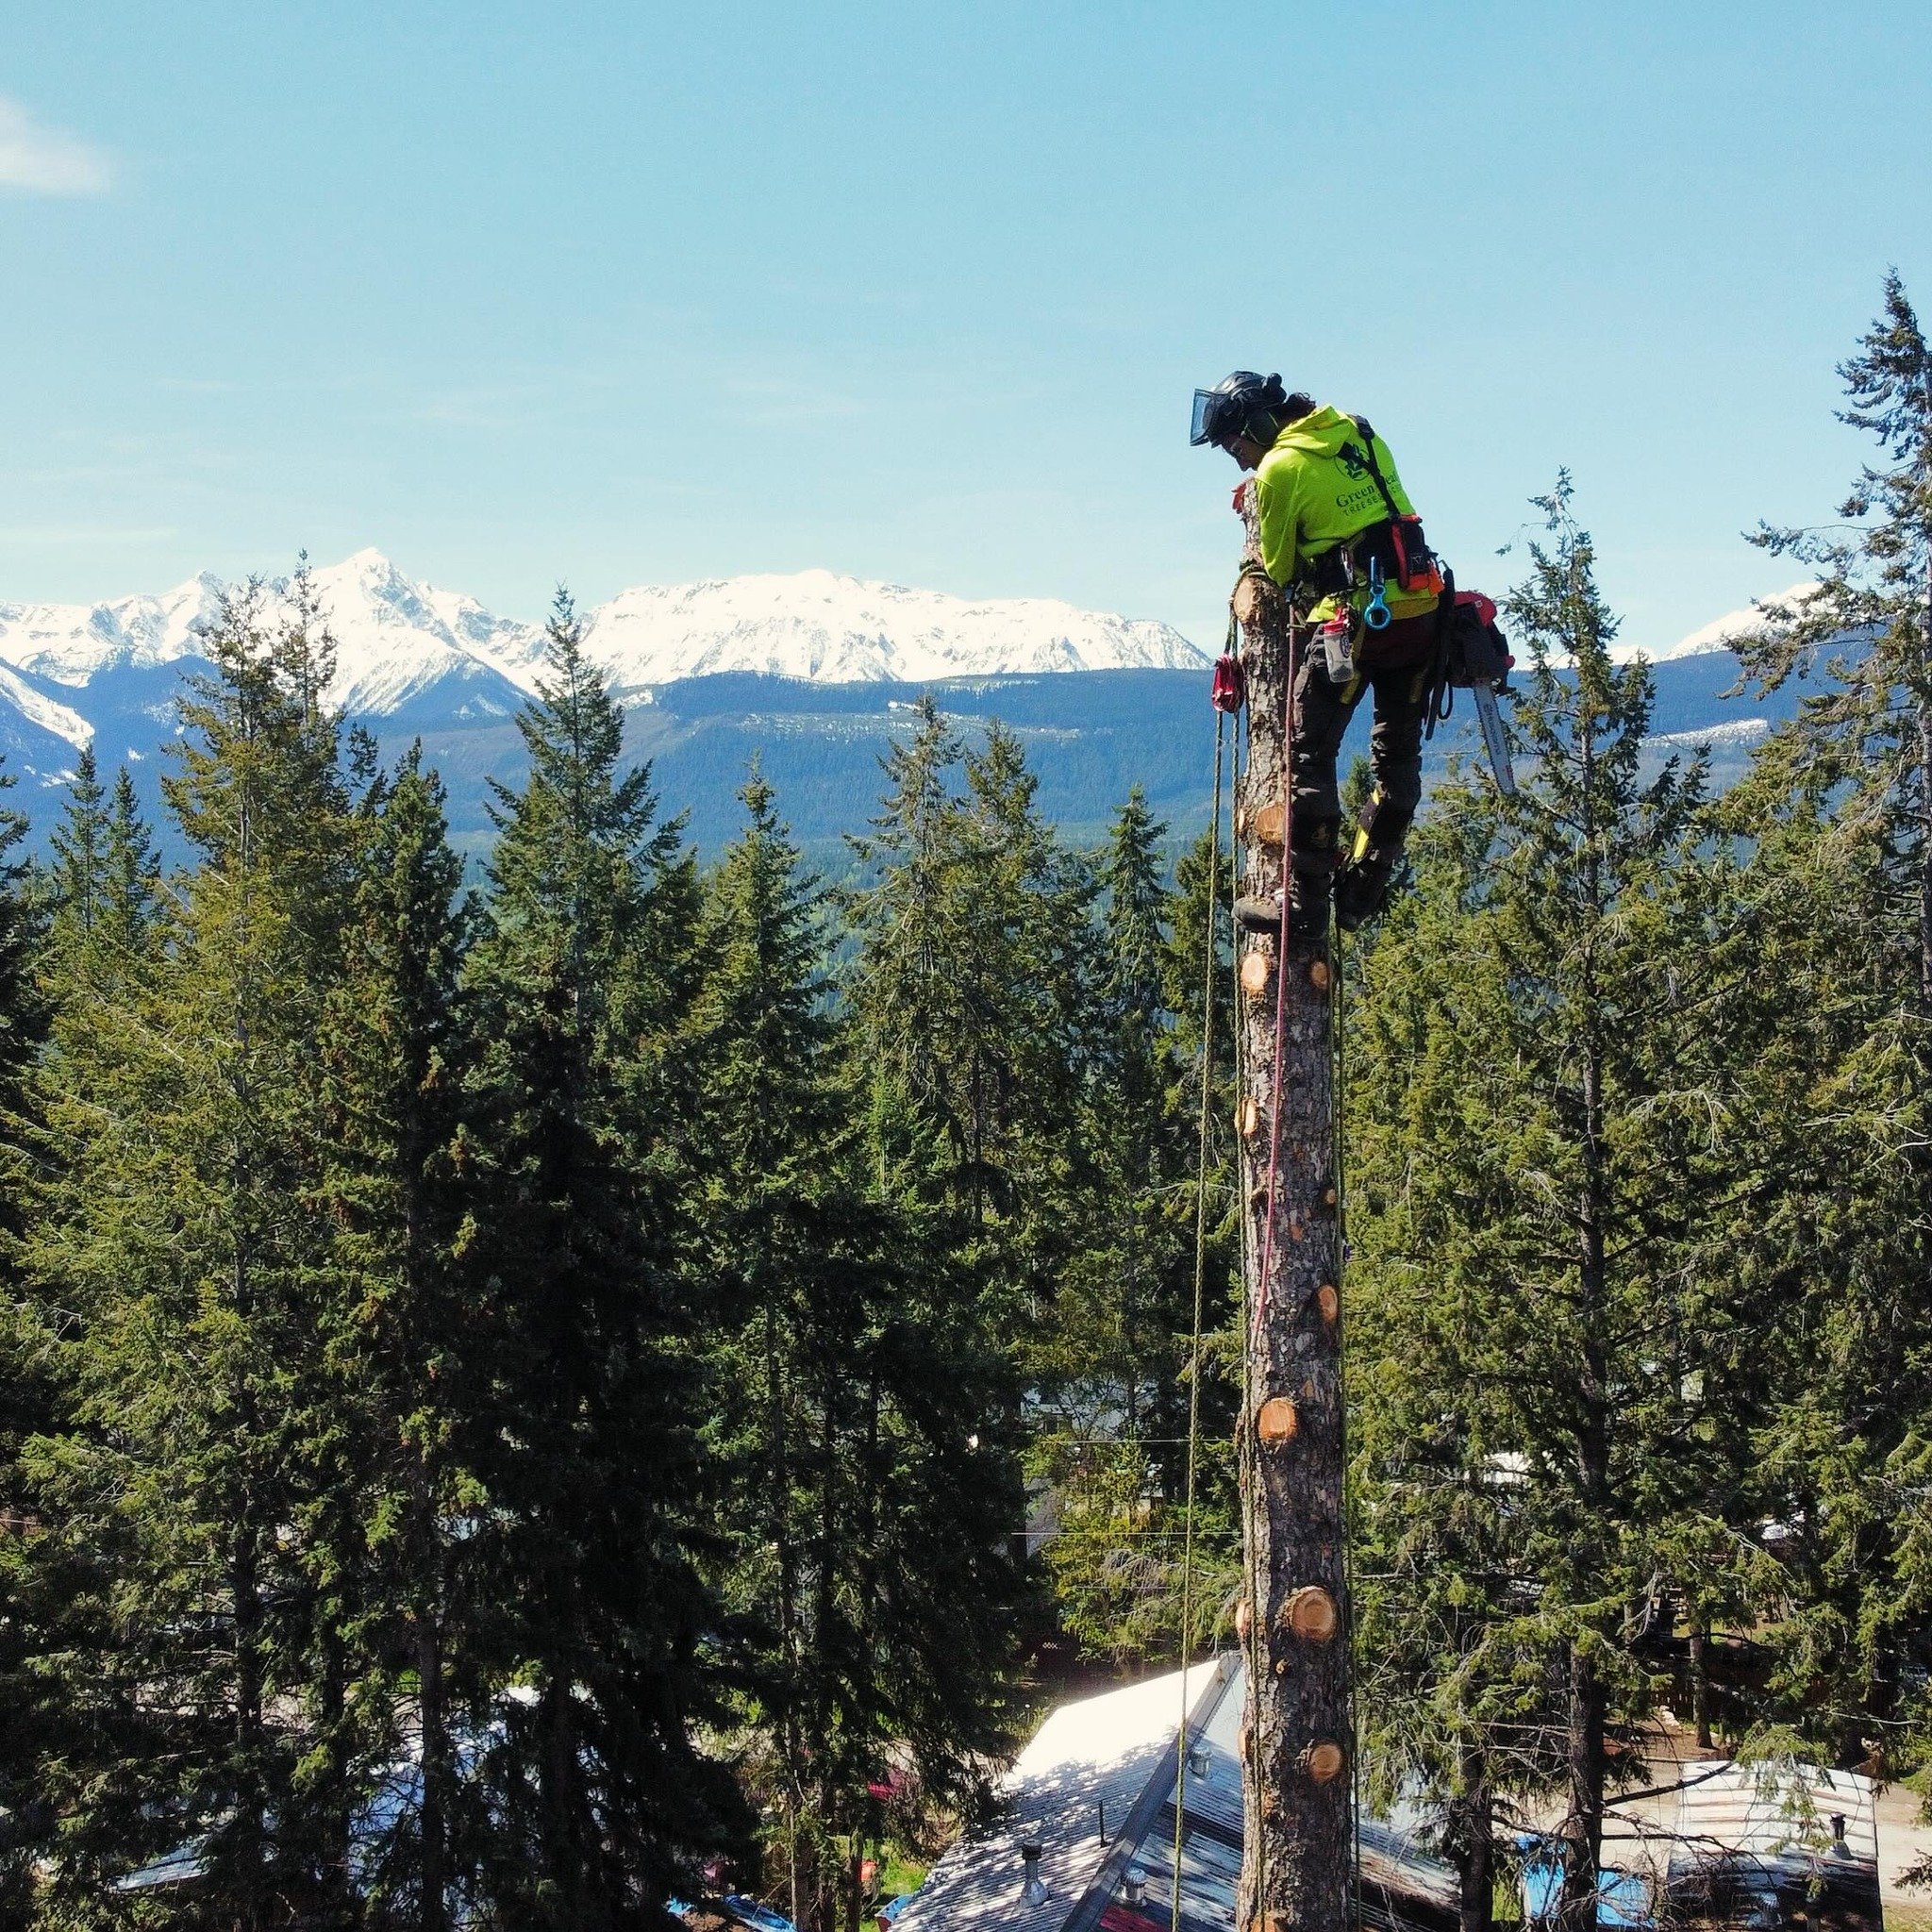 Today was one of those beauty spring days that every western Canadian arborist will light up the internet with stunning views from the canopies! 🌲🔝So here we are with one from our office 😉 in Golden BC! Crew leader, Josh Fischbuch, skillfully tack